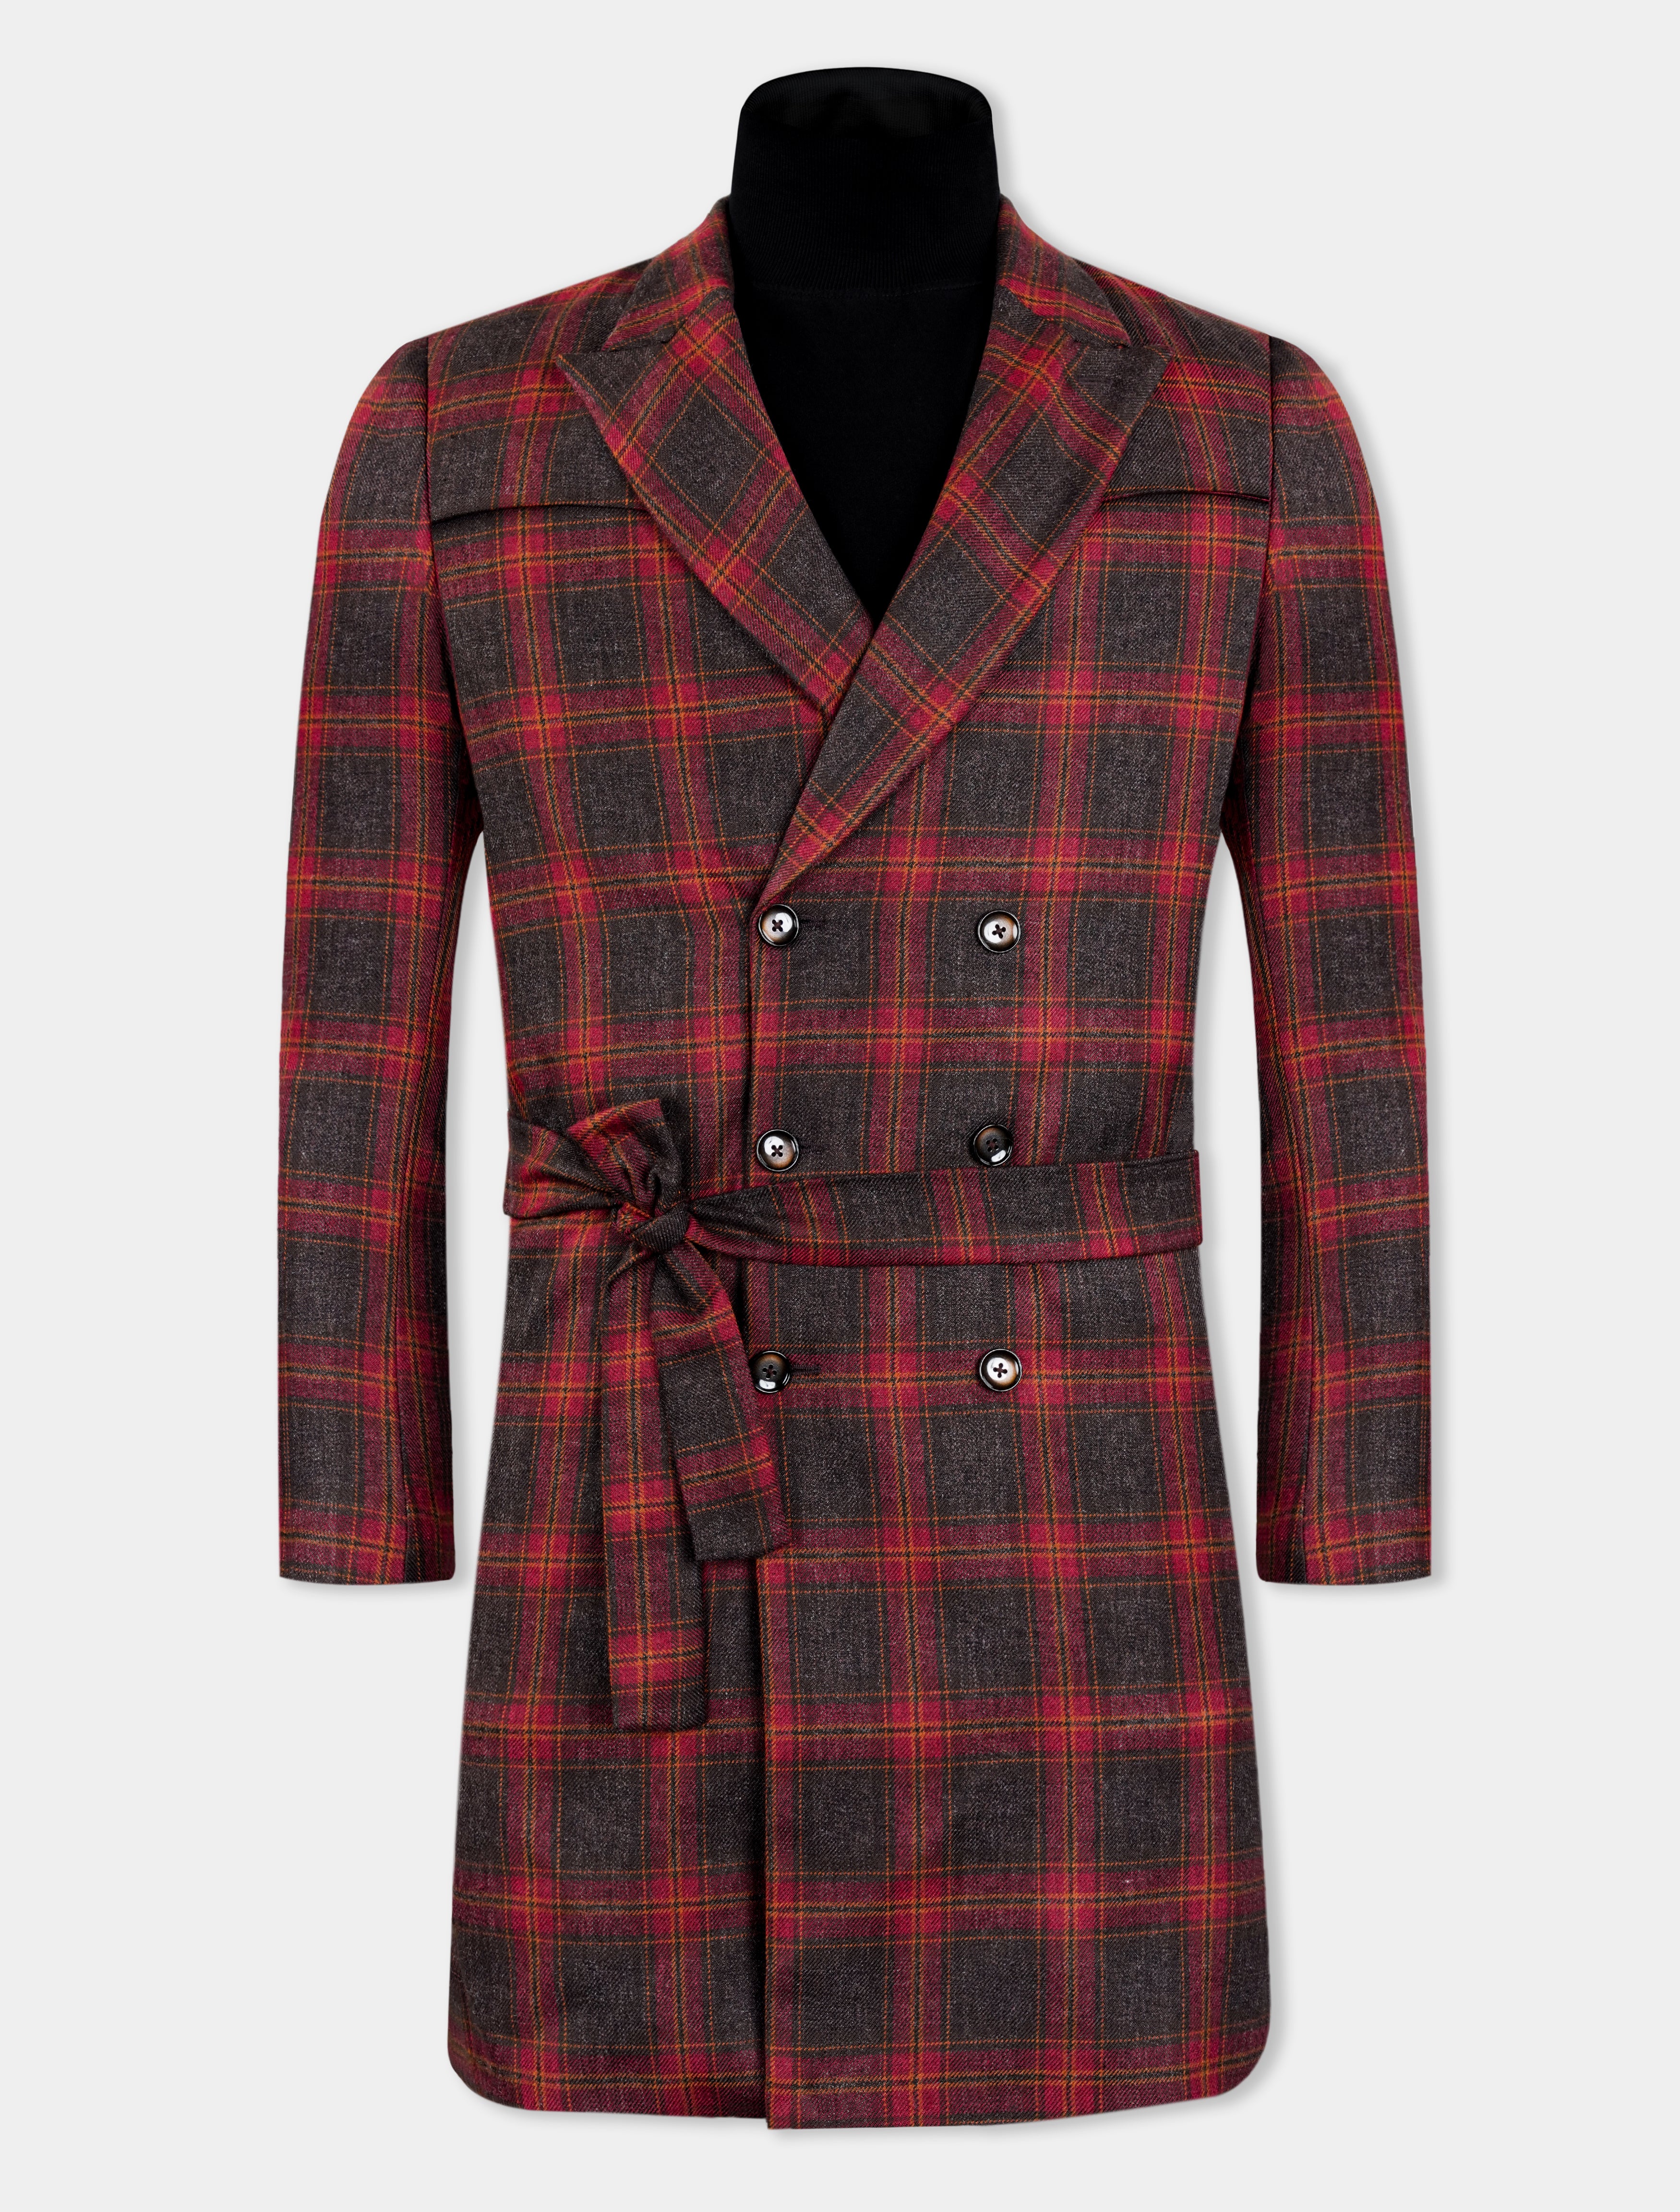 Claret Red and Walnut Brown Tweed Plaid Double Breasted Designer Trench Coat TCB2918-DB-D1-36, TCB2918-DB-D1-38, TCB2918-DB-D1-40, TCB2918-DB-D1-42, TCB2918-DB-D1-44, TCB2918-DB-D1-46, TCB2918-DB-D1-48, TCB2918-DB-D1-50, TCB2918-DB-D1-52, TCB2918-DB-D1-54, TCB2918-DB-D1-56, TCB2918-DB-D1-58, TCB2918-DB-D1-60